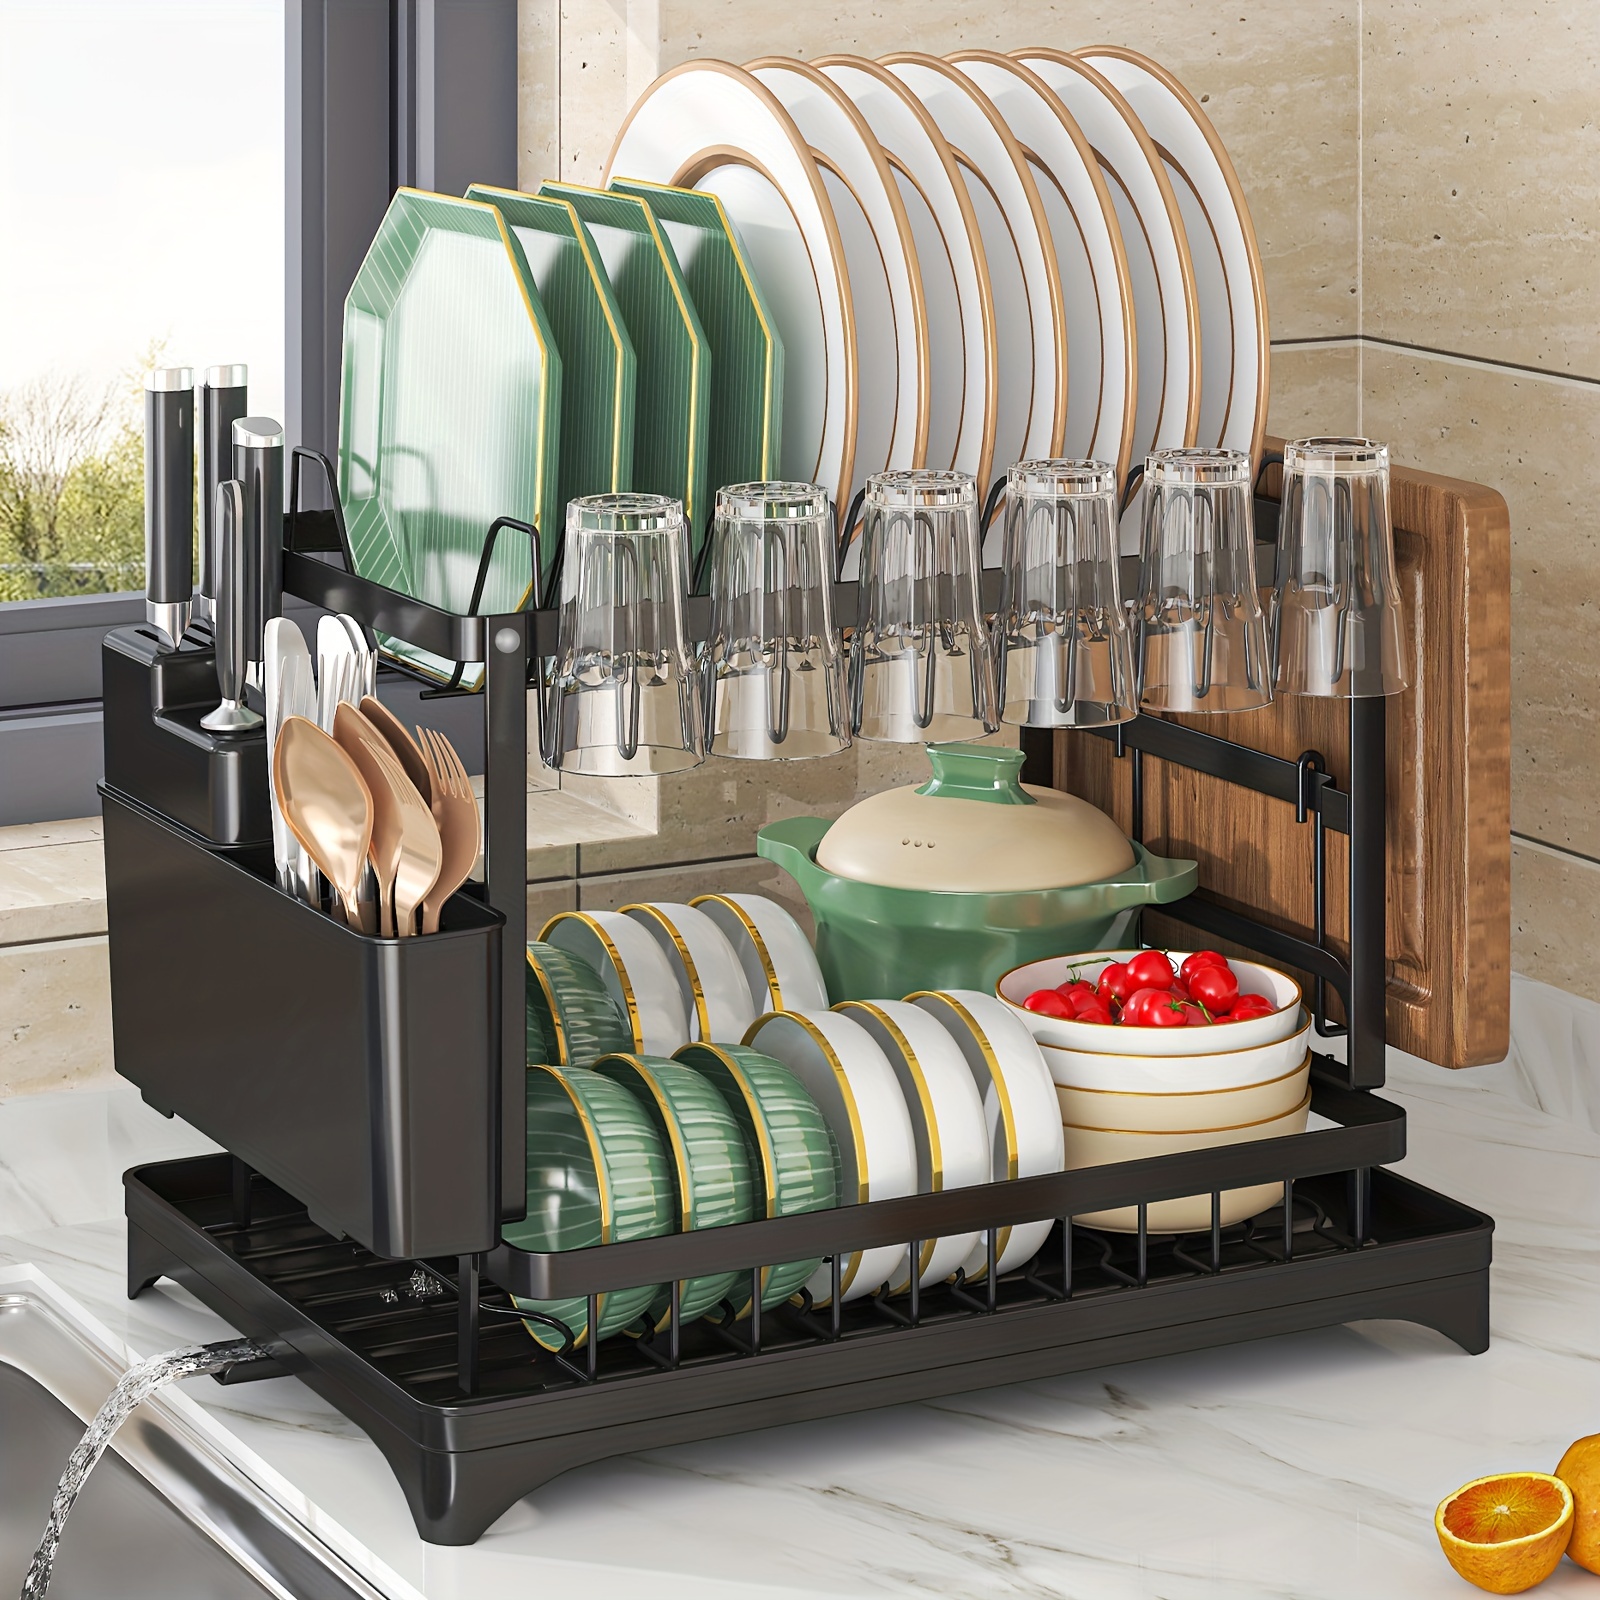 GSlife Dish Drying Rack with Drainboard - Expandable 2-in-1 Dish Racks for  Kitchen Counter and Sink, Rust-Resistant Metal Dish Drainer with Pan Slots